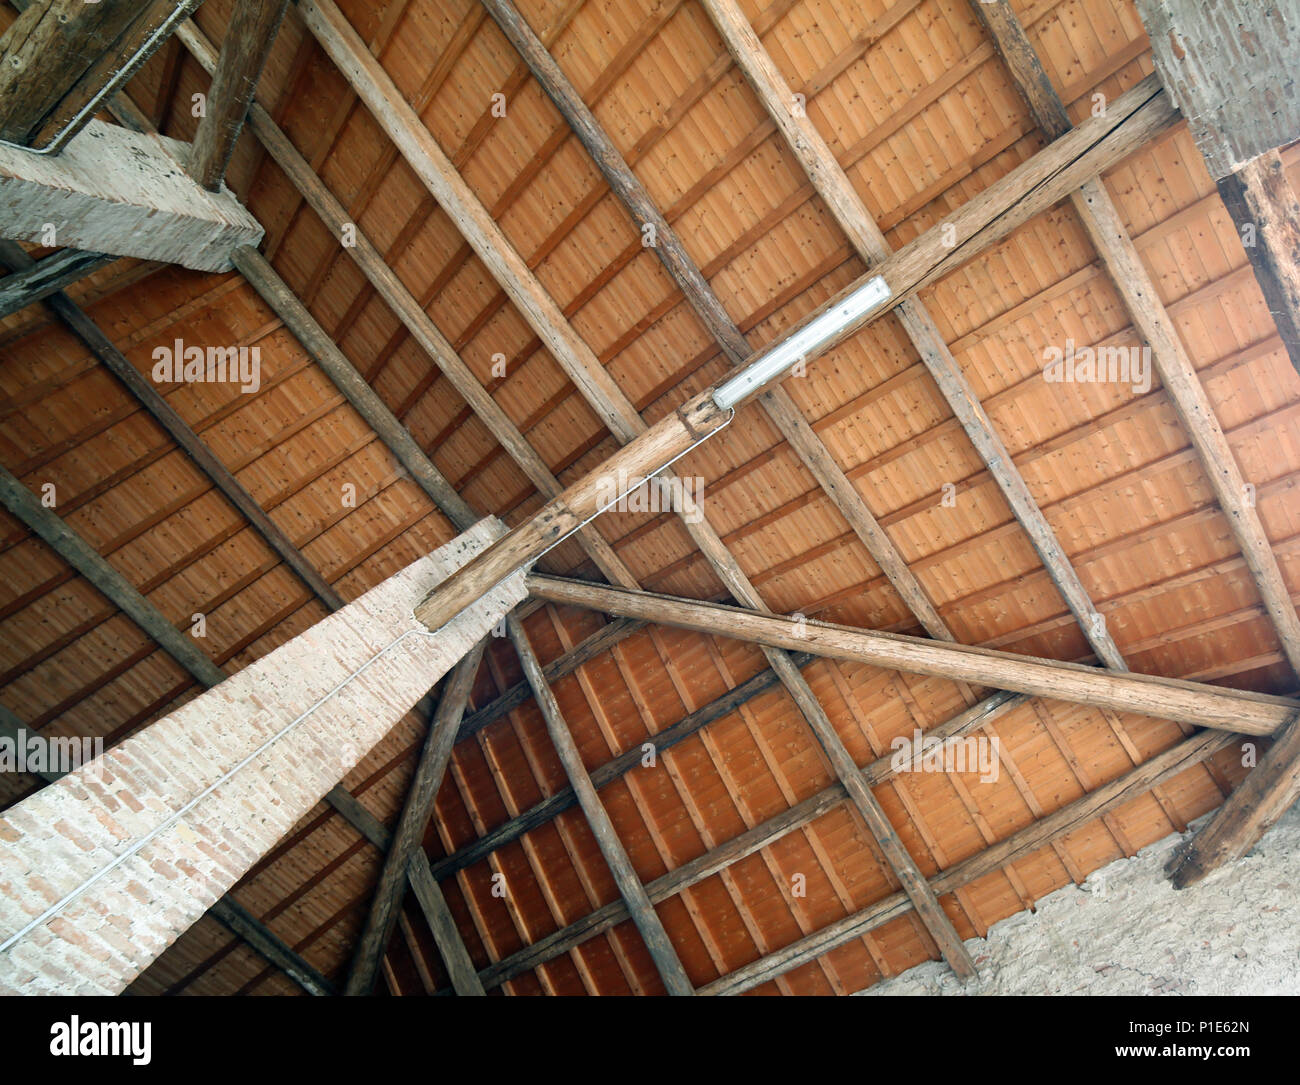 Large Roof With Terracotta Tiles And Wooden Beams Of An Ancient